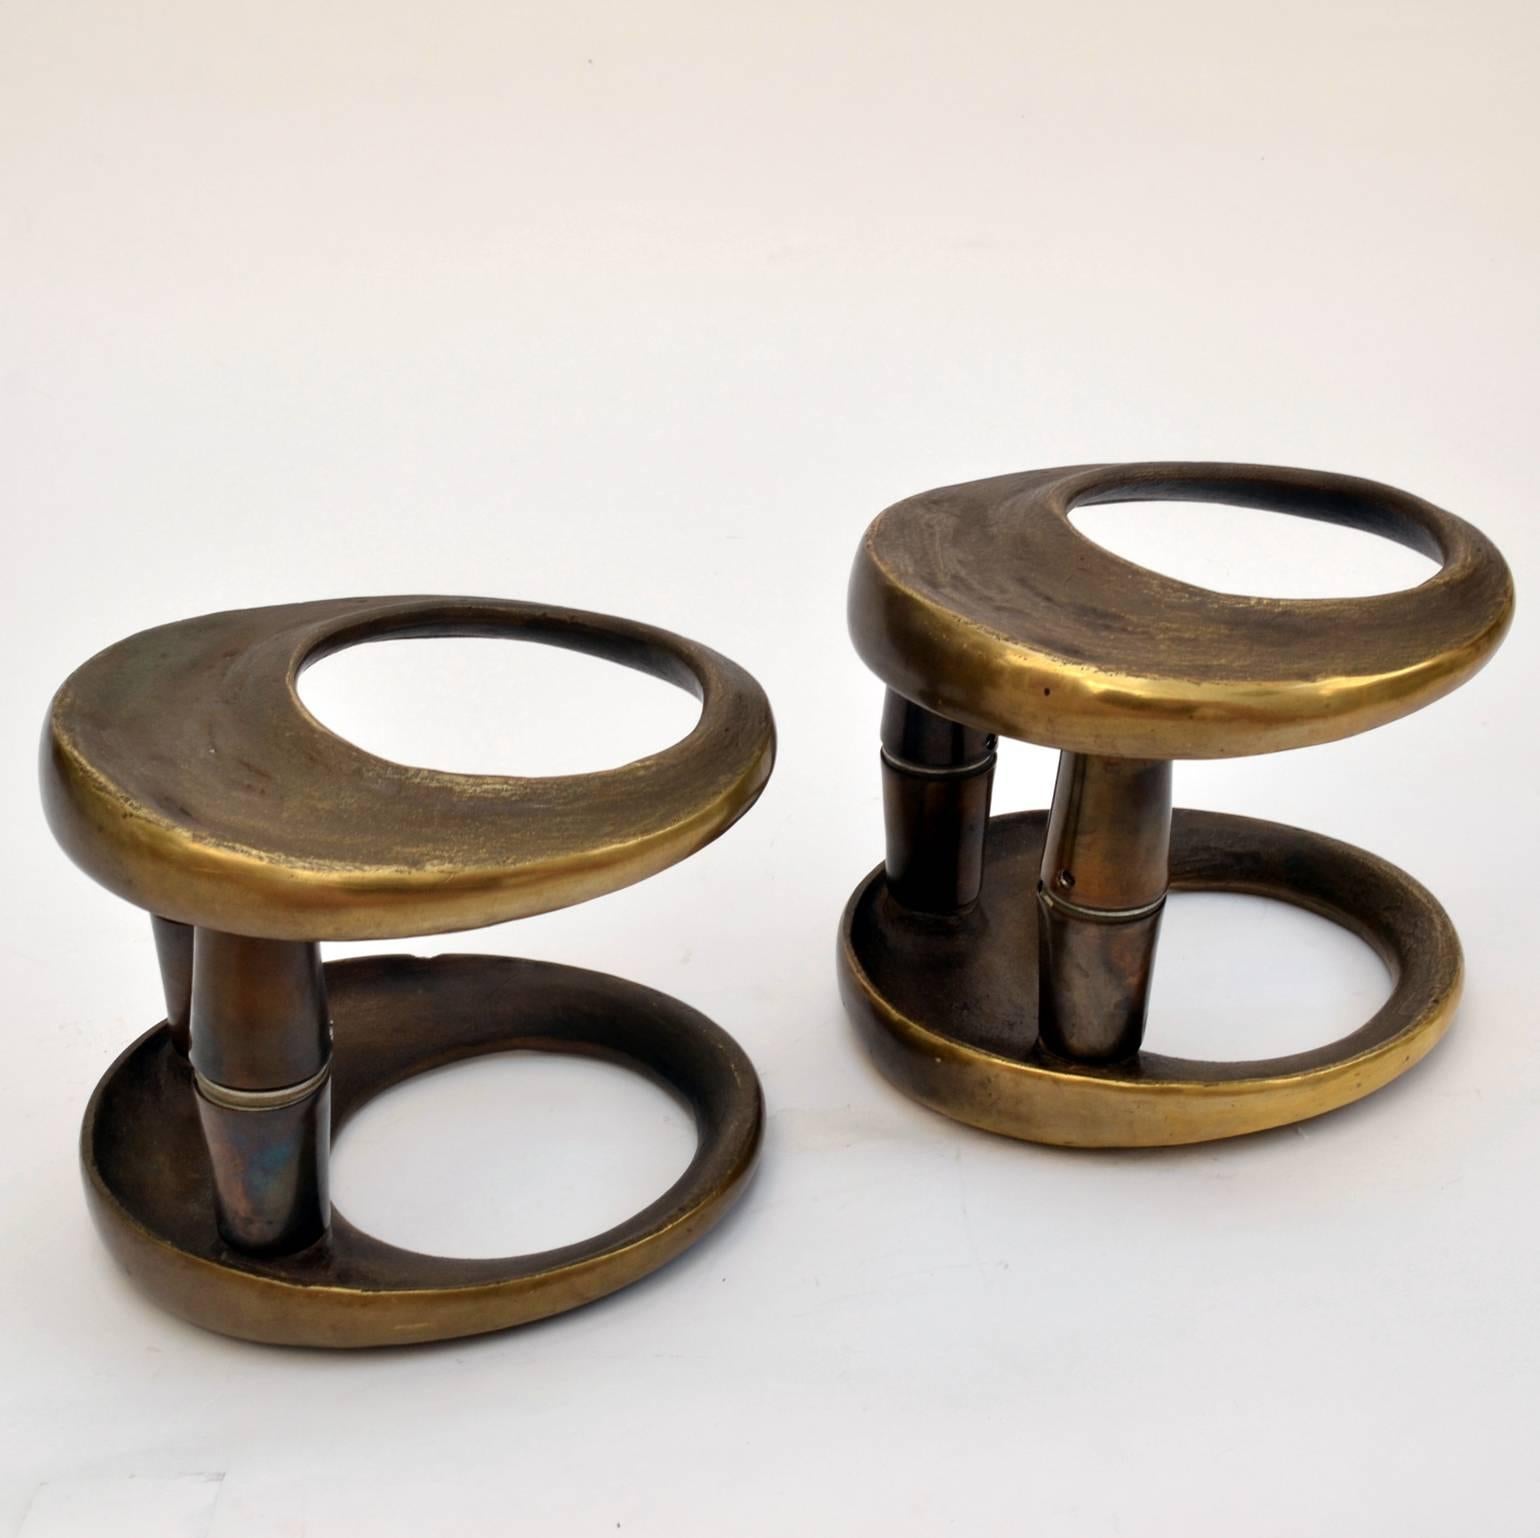 Unique double round bronze cast door handles with a textural relief
and dark patina. They are designed for push and pull doors and are suitable for glass doors.